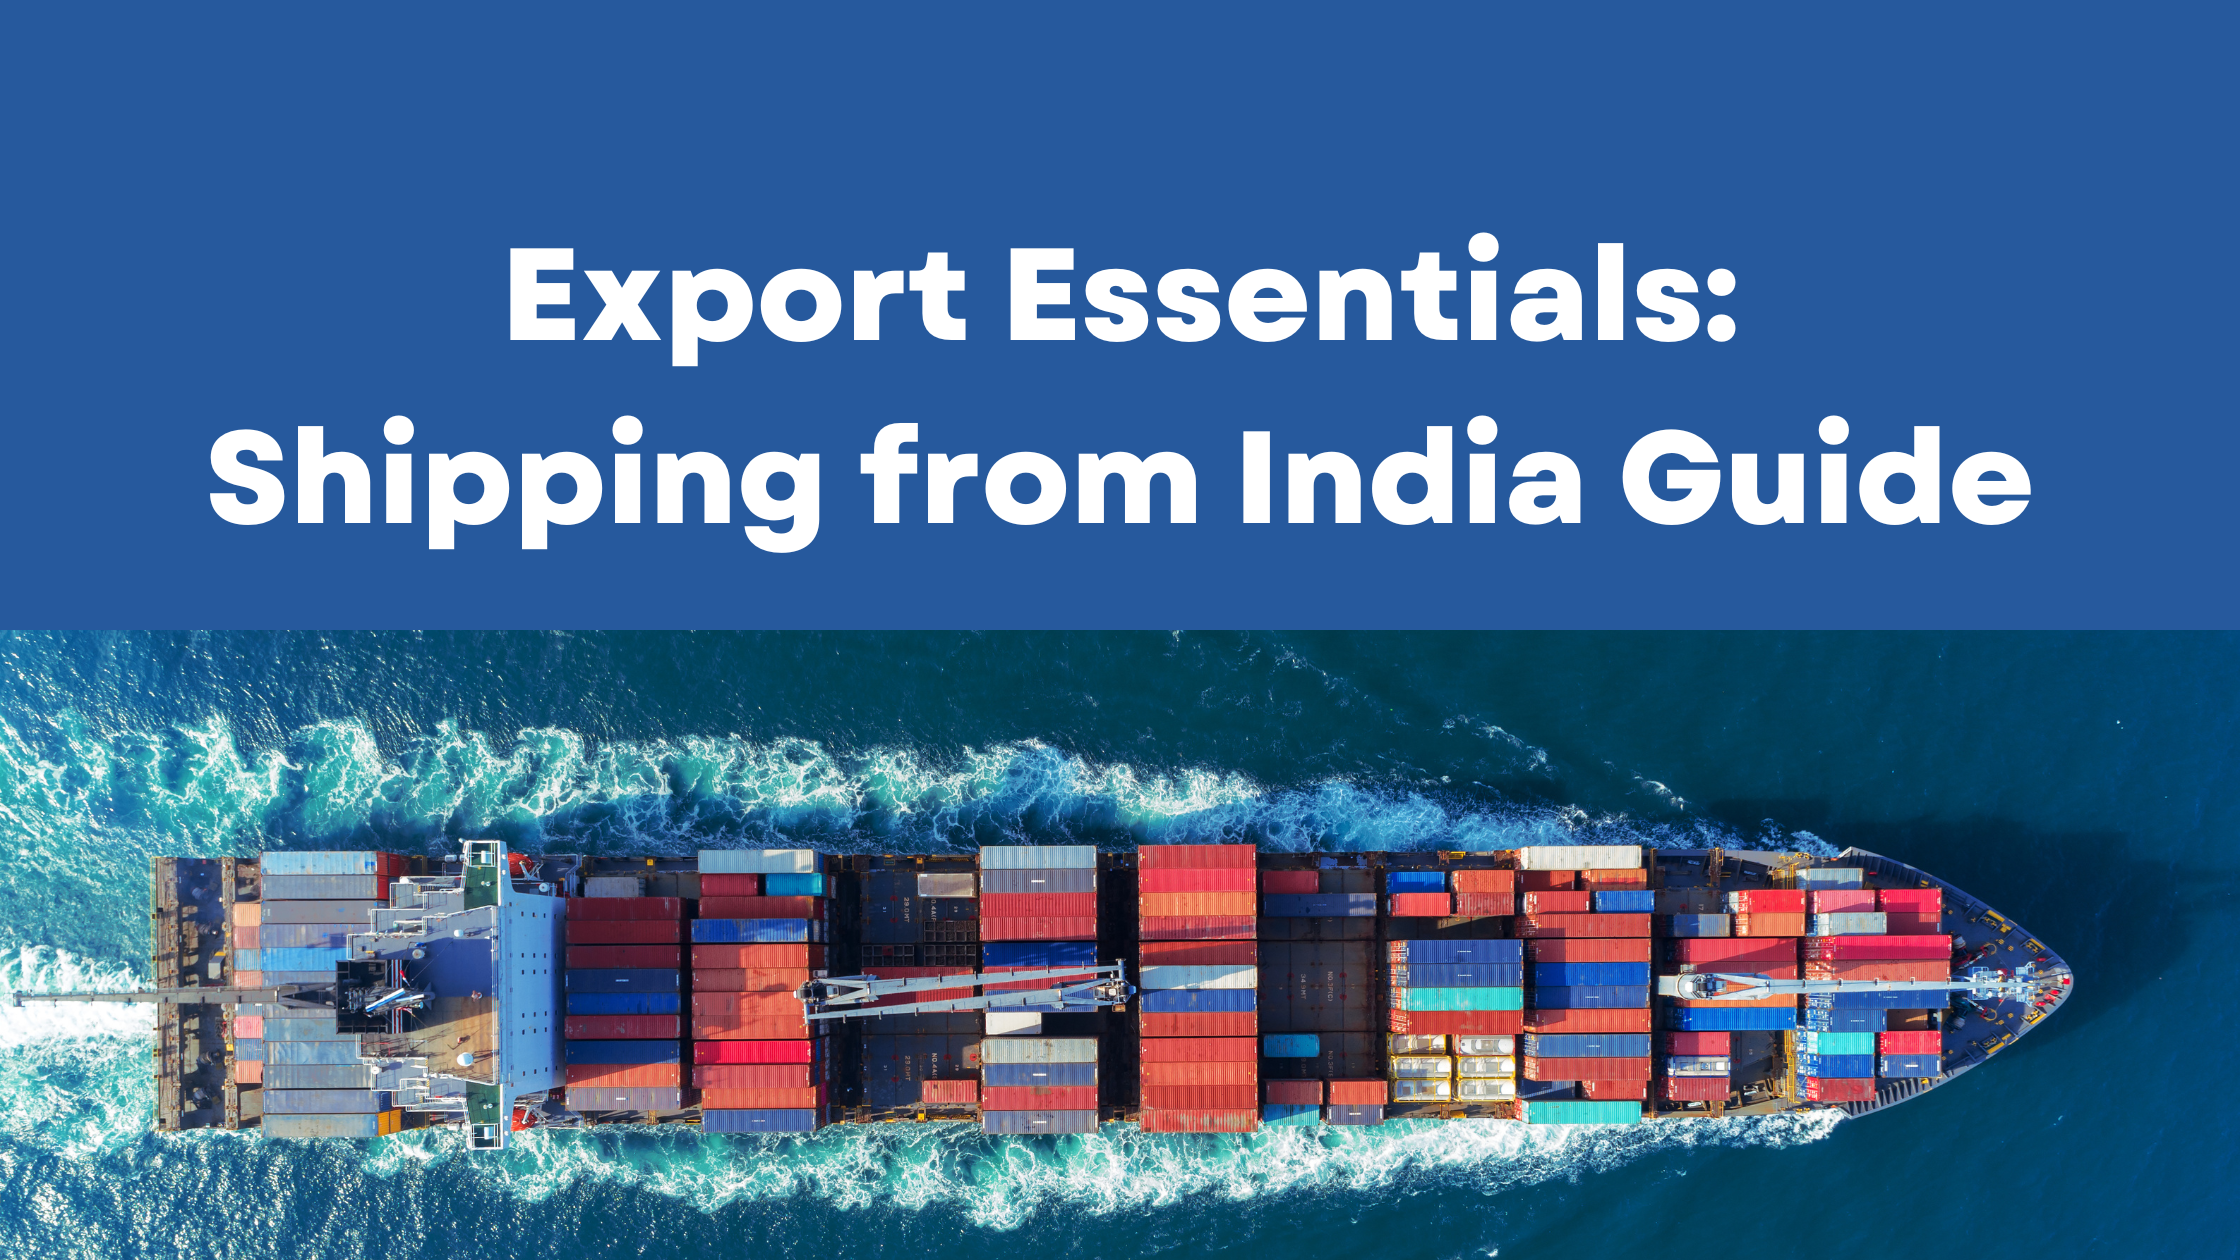 Export Essentials: Shipping from India Guide